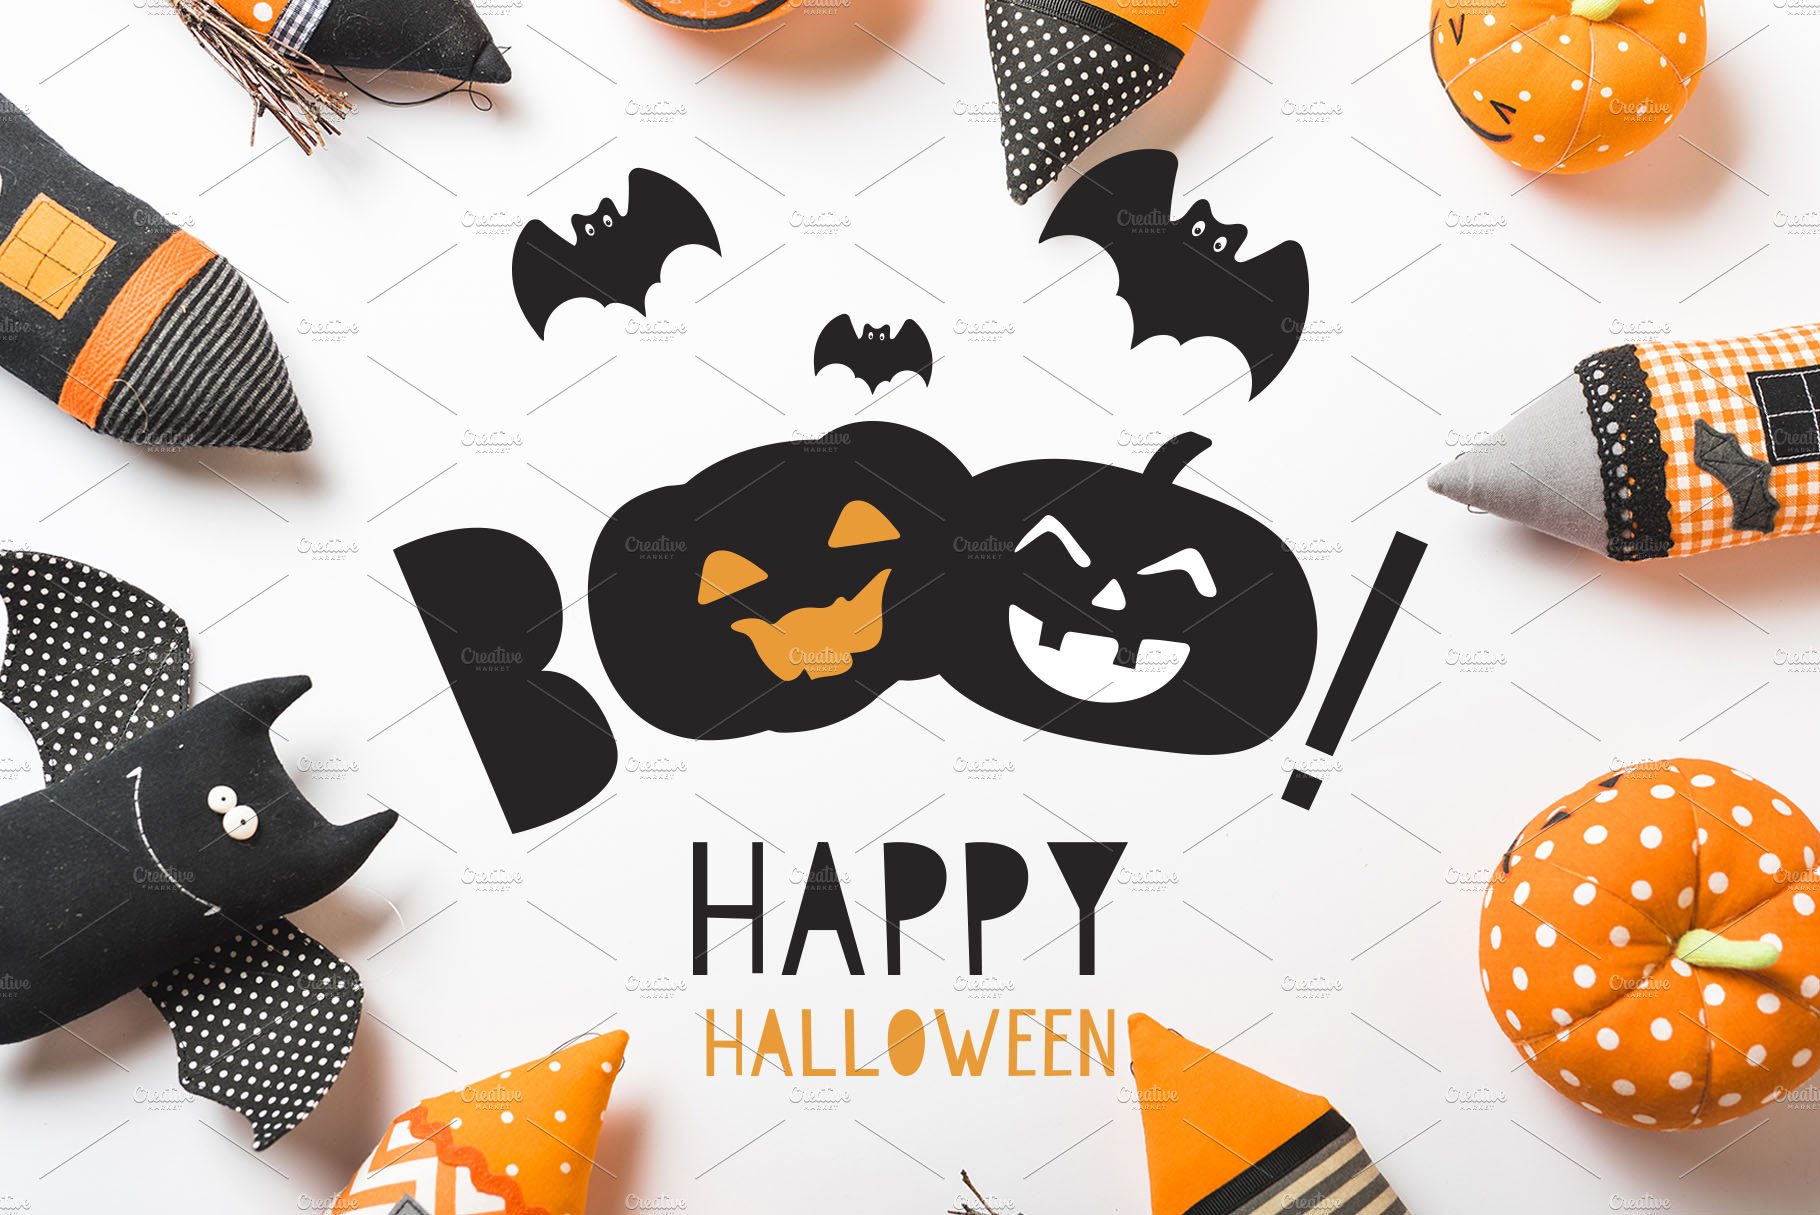 Kids Halloween Font and Graphics Set cover image.